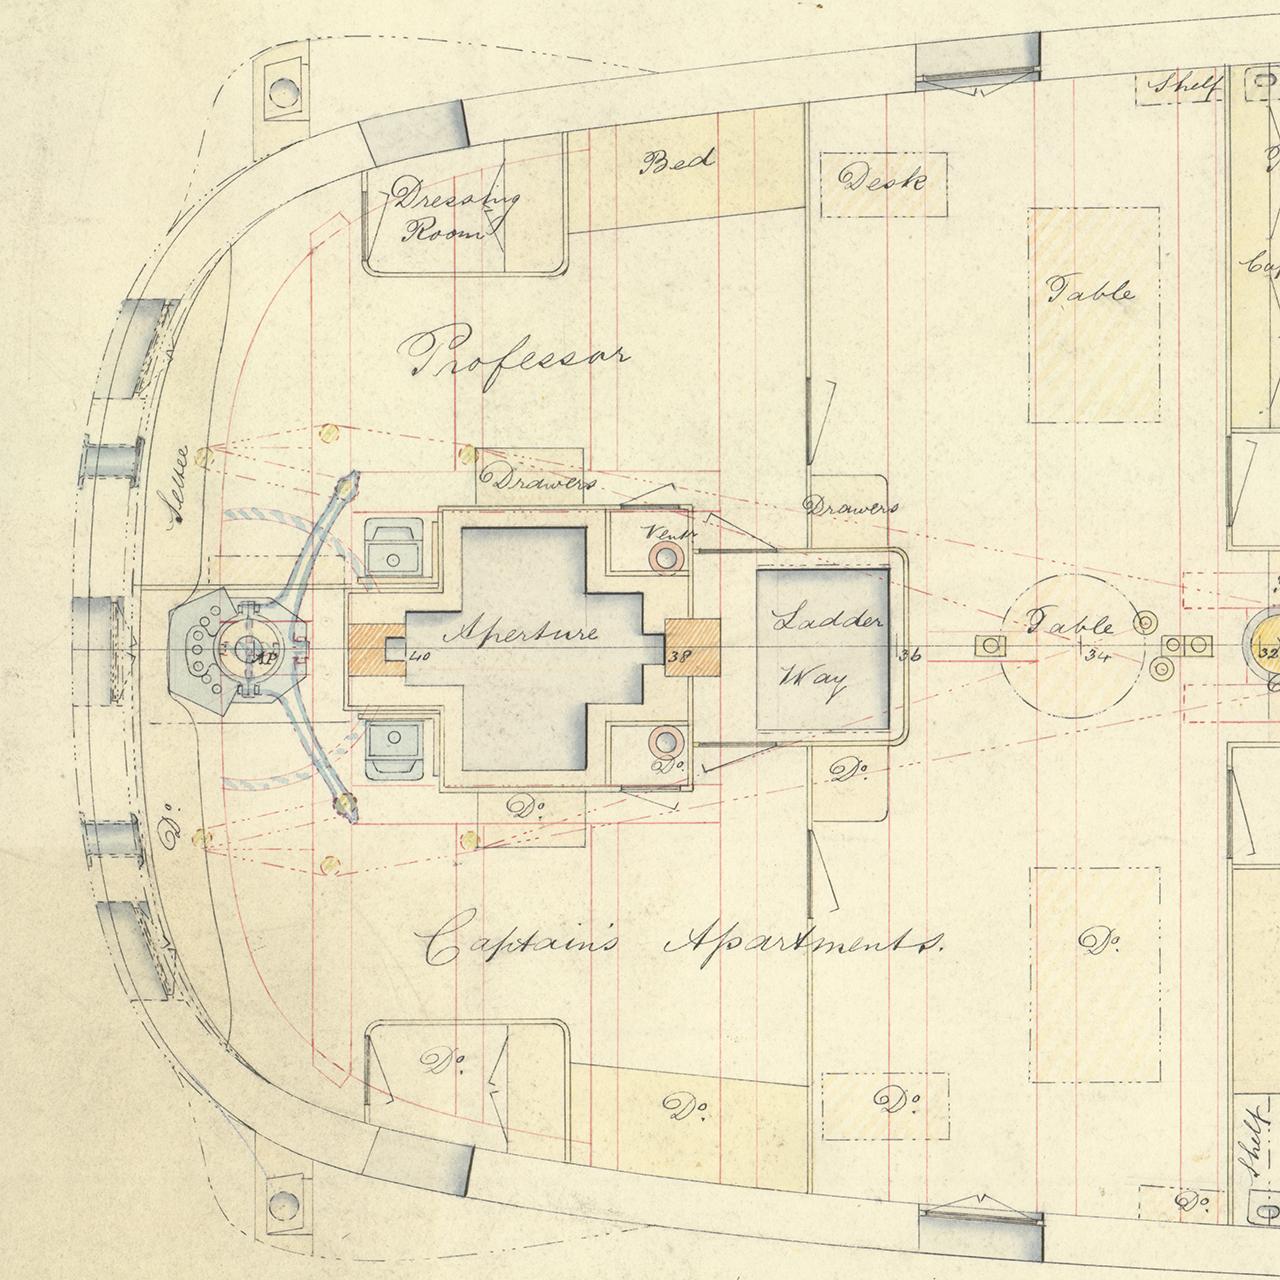 Detail from the main deck plan of HMS Challenger, showing the design for the cabins of captain and lead scientist